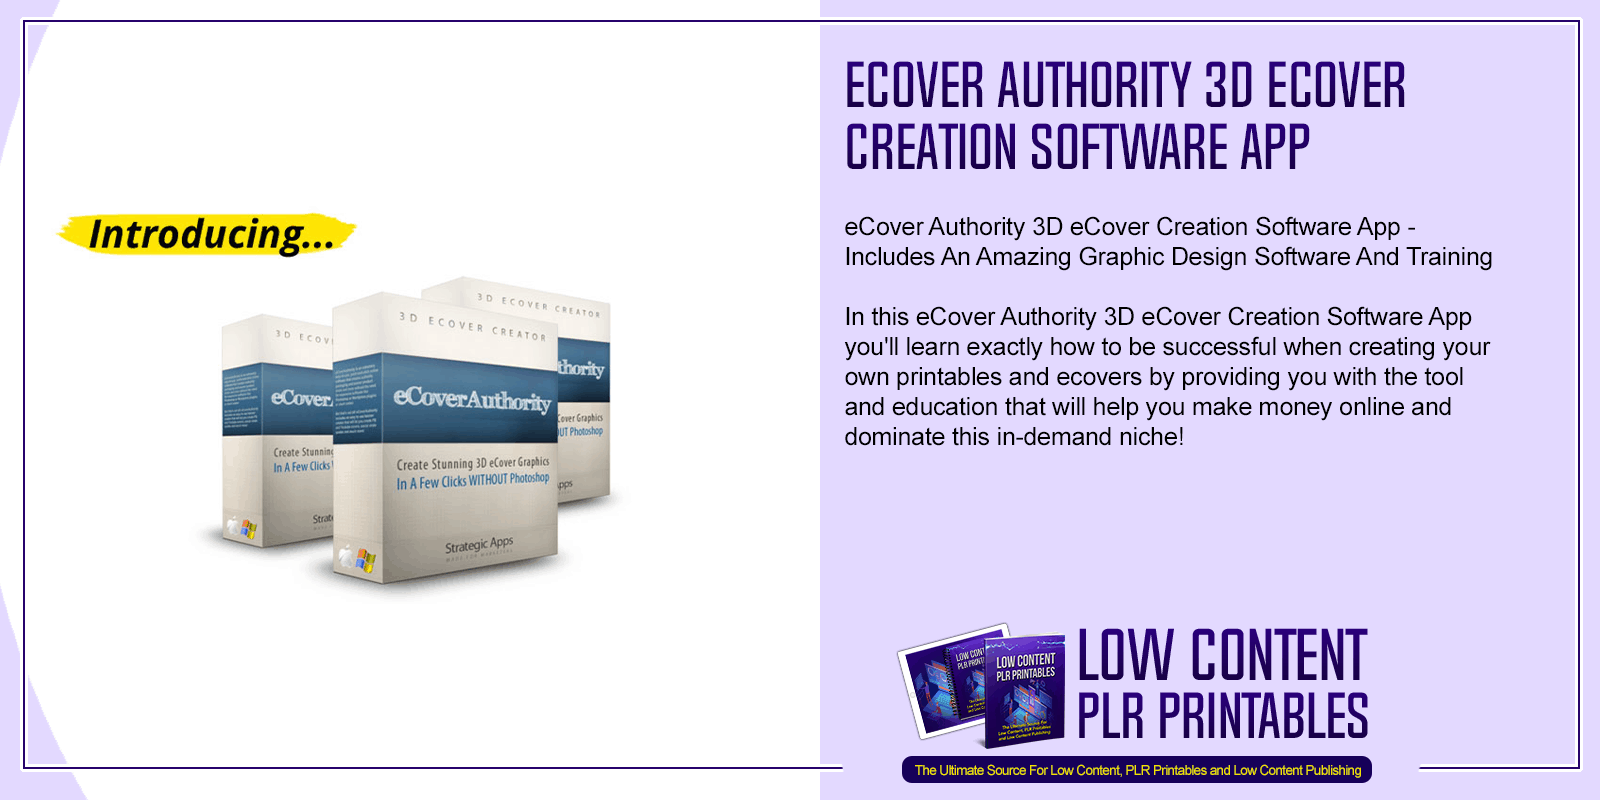 eCover Authority 3D eCover Creation Software App